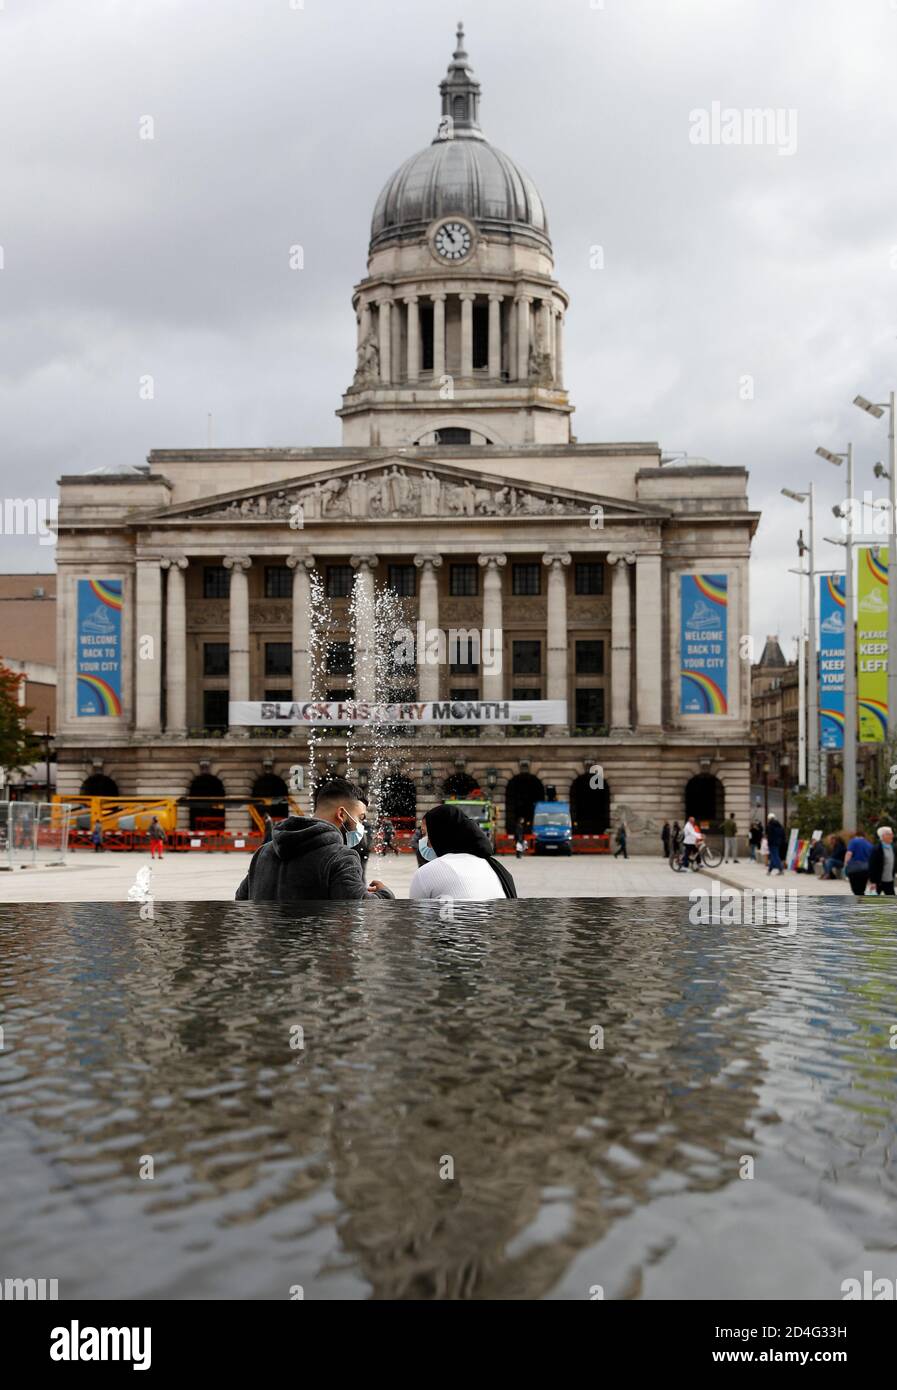 Nottingham, Nottinghamshire, UK. 9th October 2020. People sit in front of the Town Hall after it was announced Nottingham has the highest Covid-19 infection rate in the UK. Credit Darren Staples/Alamy Live News. Stock Photo